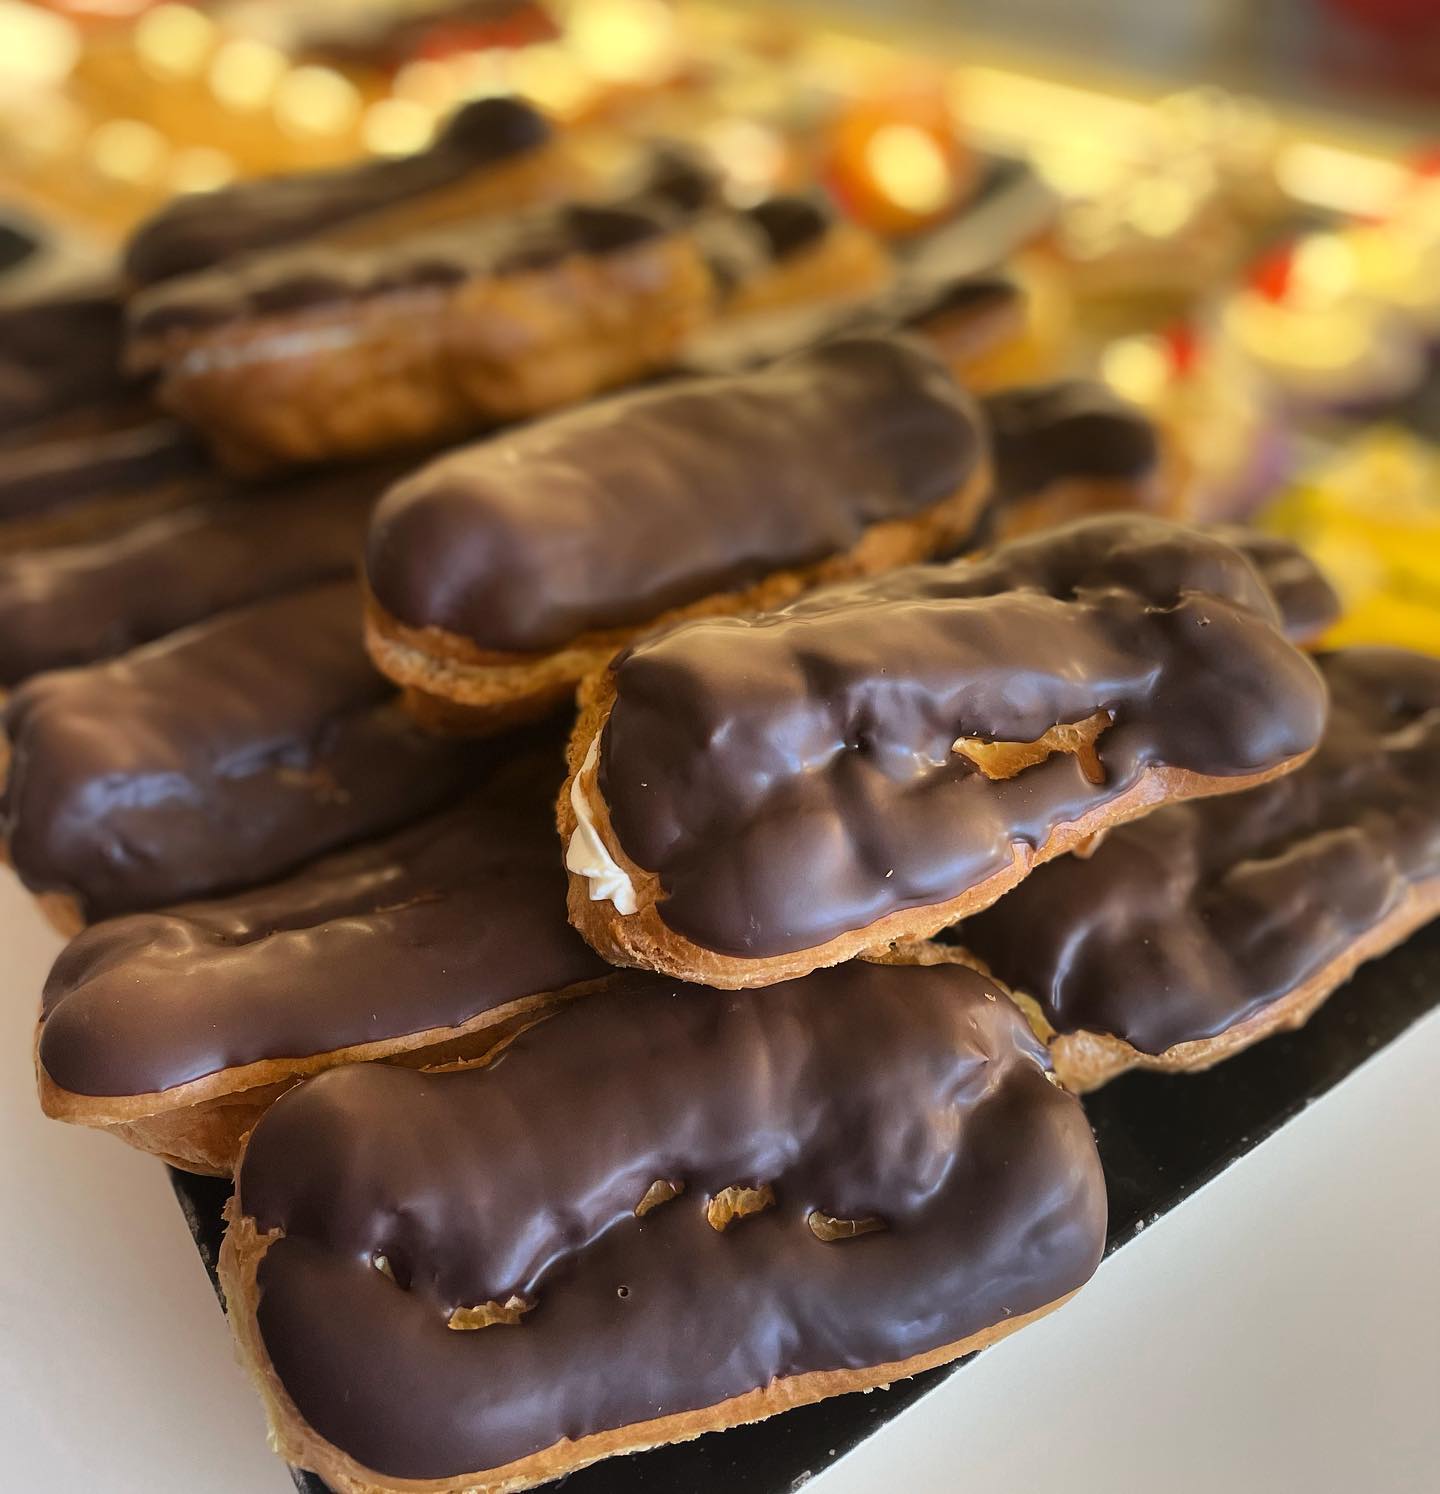 We think INDULGE is the right word for this June Bank Holiday 🧁🍫☕️ 

Open all weekend for breakfast, lunch, cakes and coffee 💫

Fri & Sat: 8.30 - 5.30
Sun & Mon: 9.30 - 5

#wildatlanticway #connemara #clifden #galway #bakery #éclairs #foodstagram